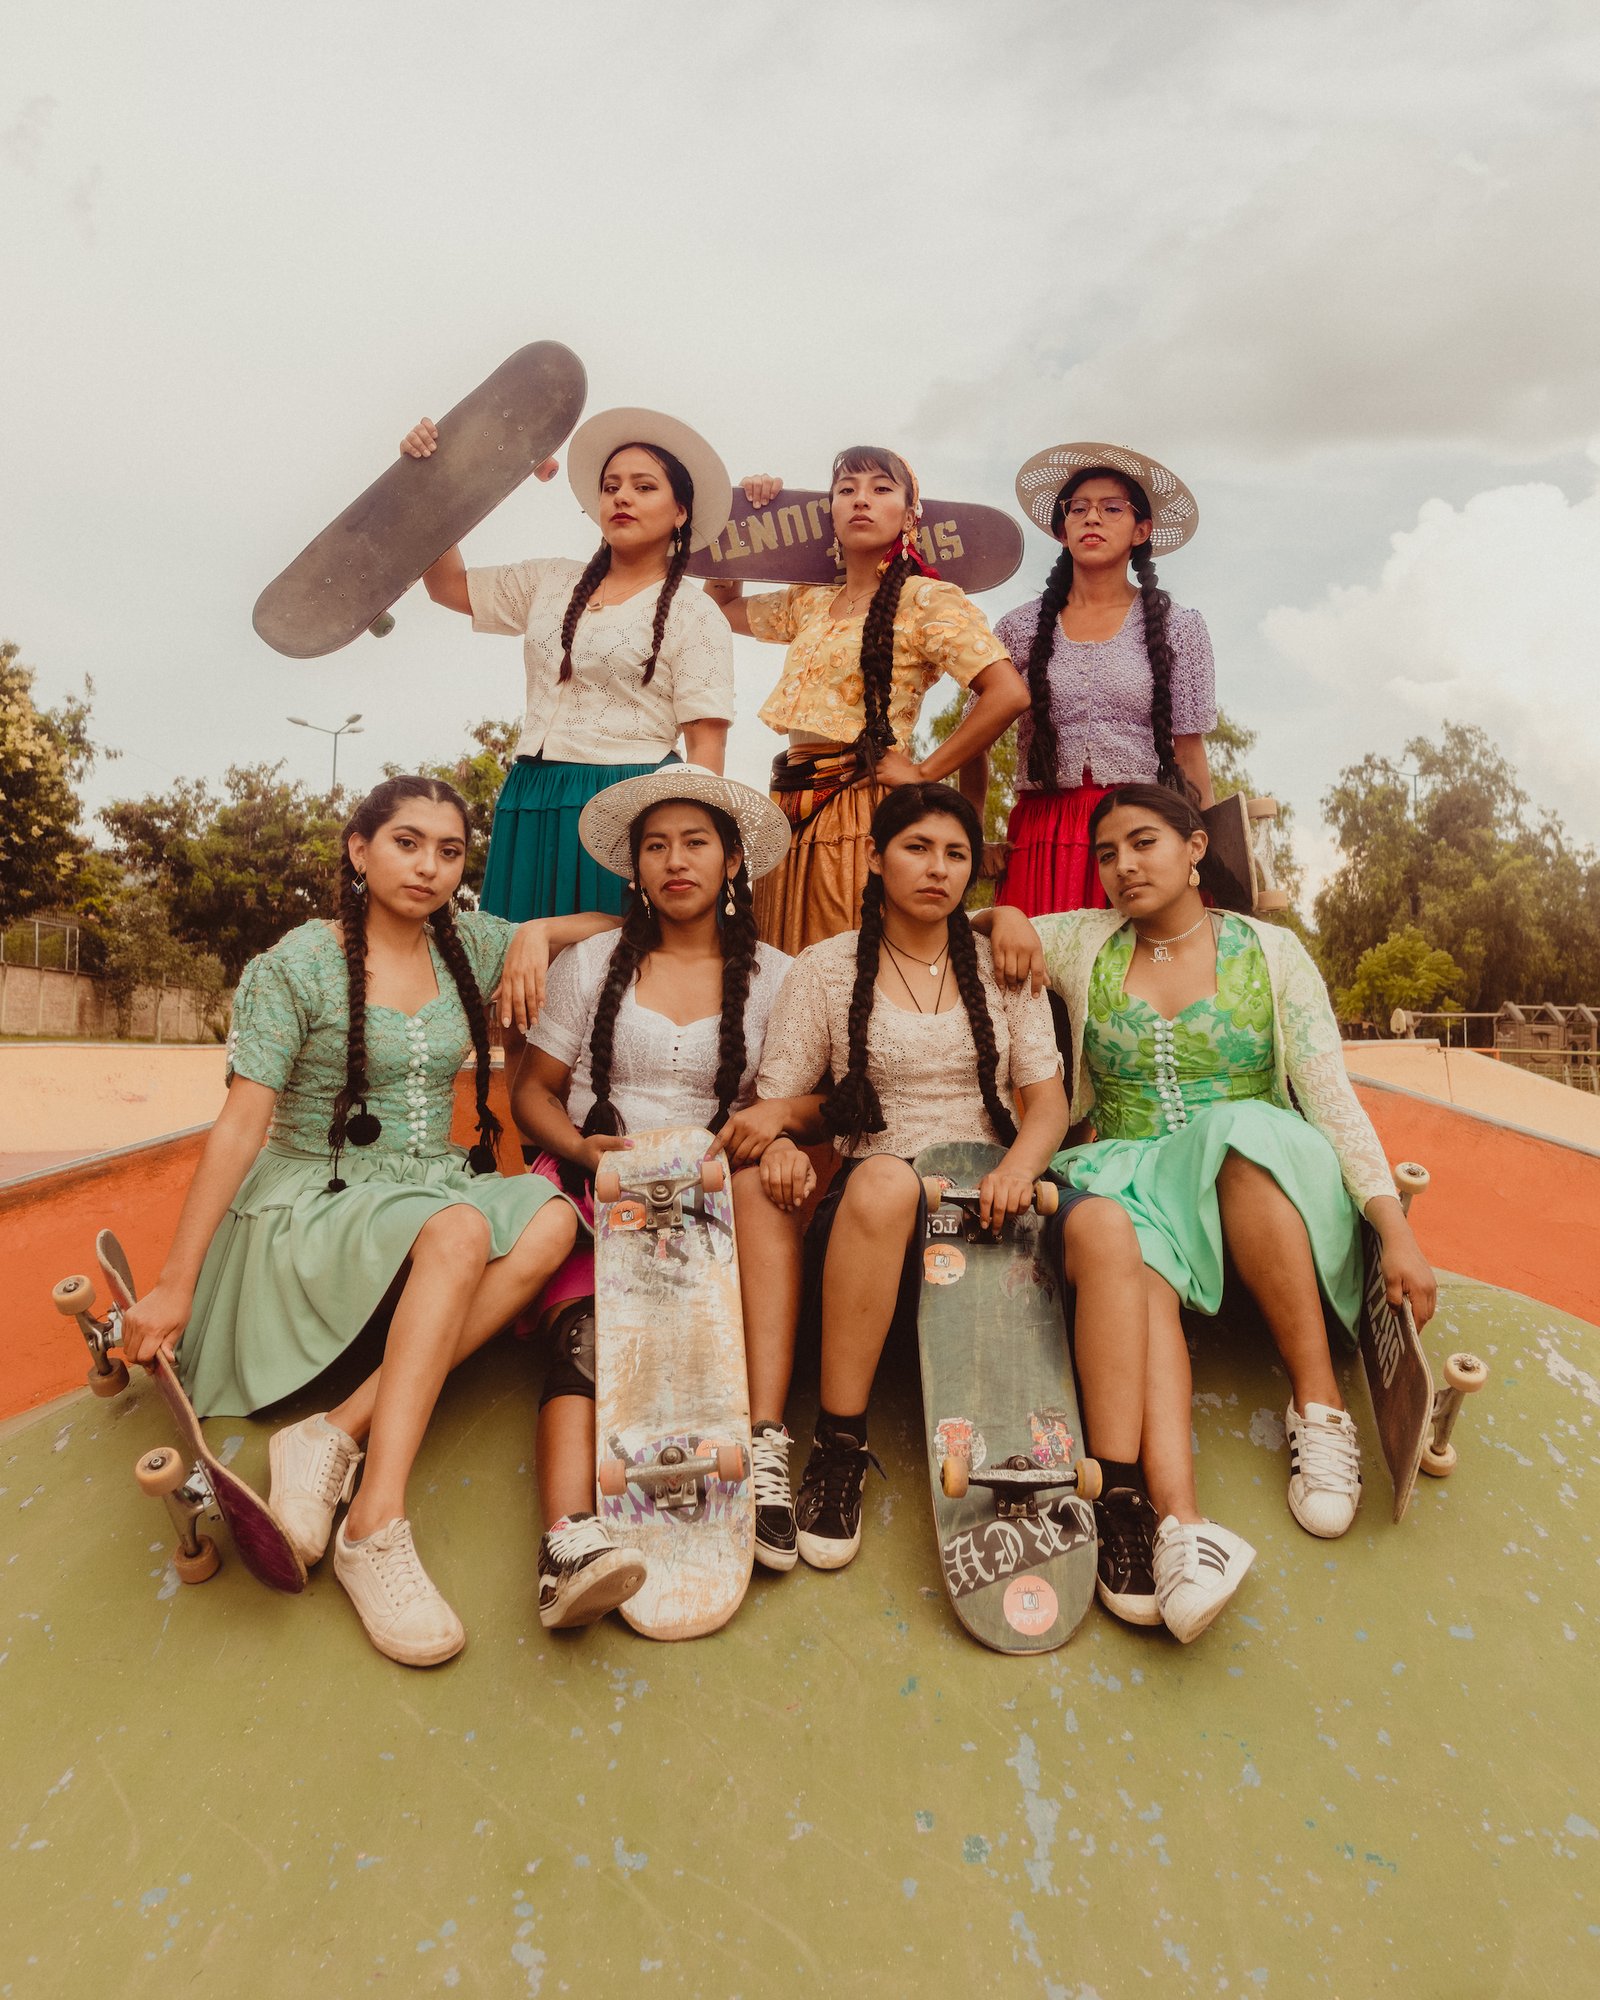 Braids and Bowlers: Indigenous Bolivian Women Skateboard in Style in Celia D. Luna’s Empowered Portraits — Colossal